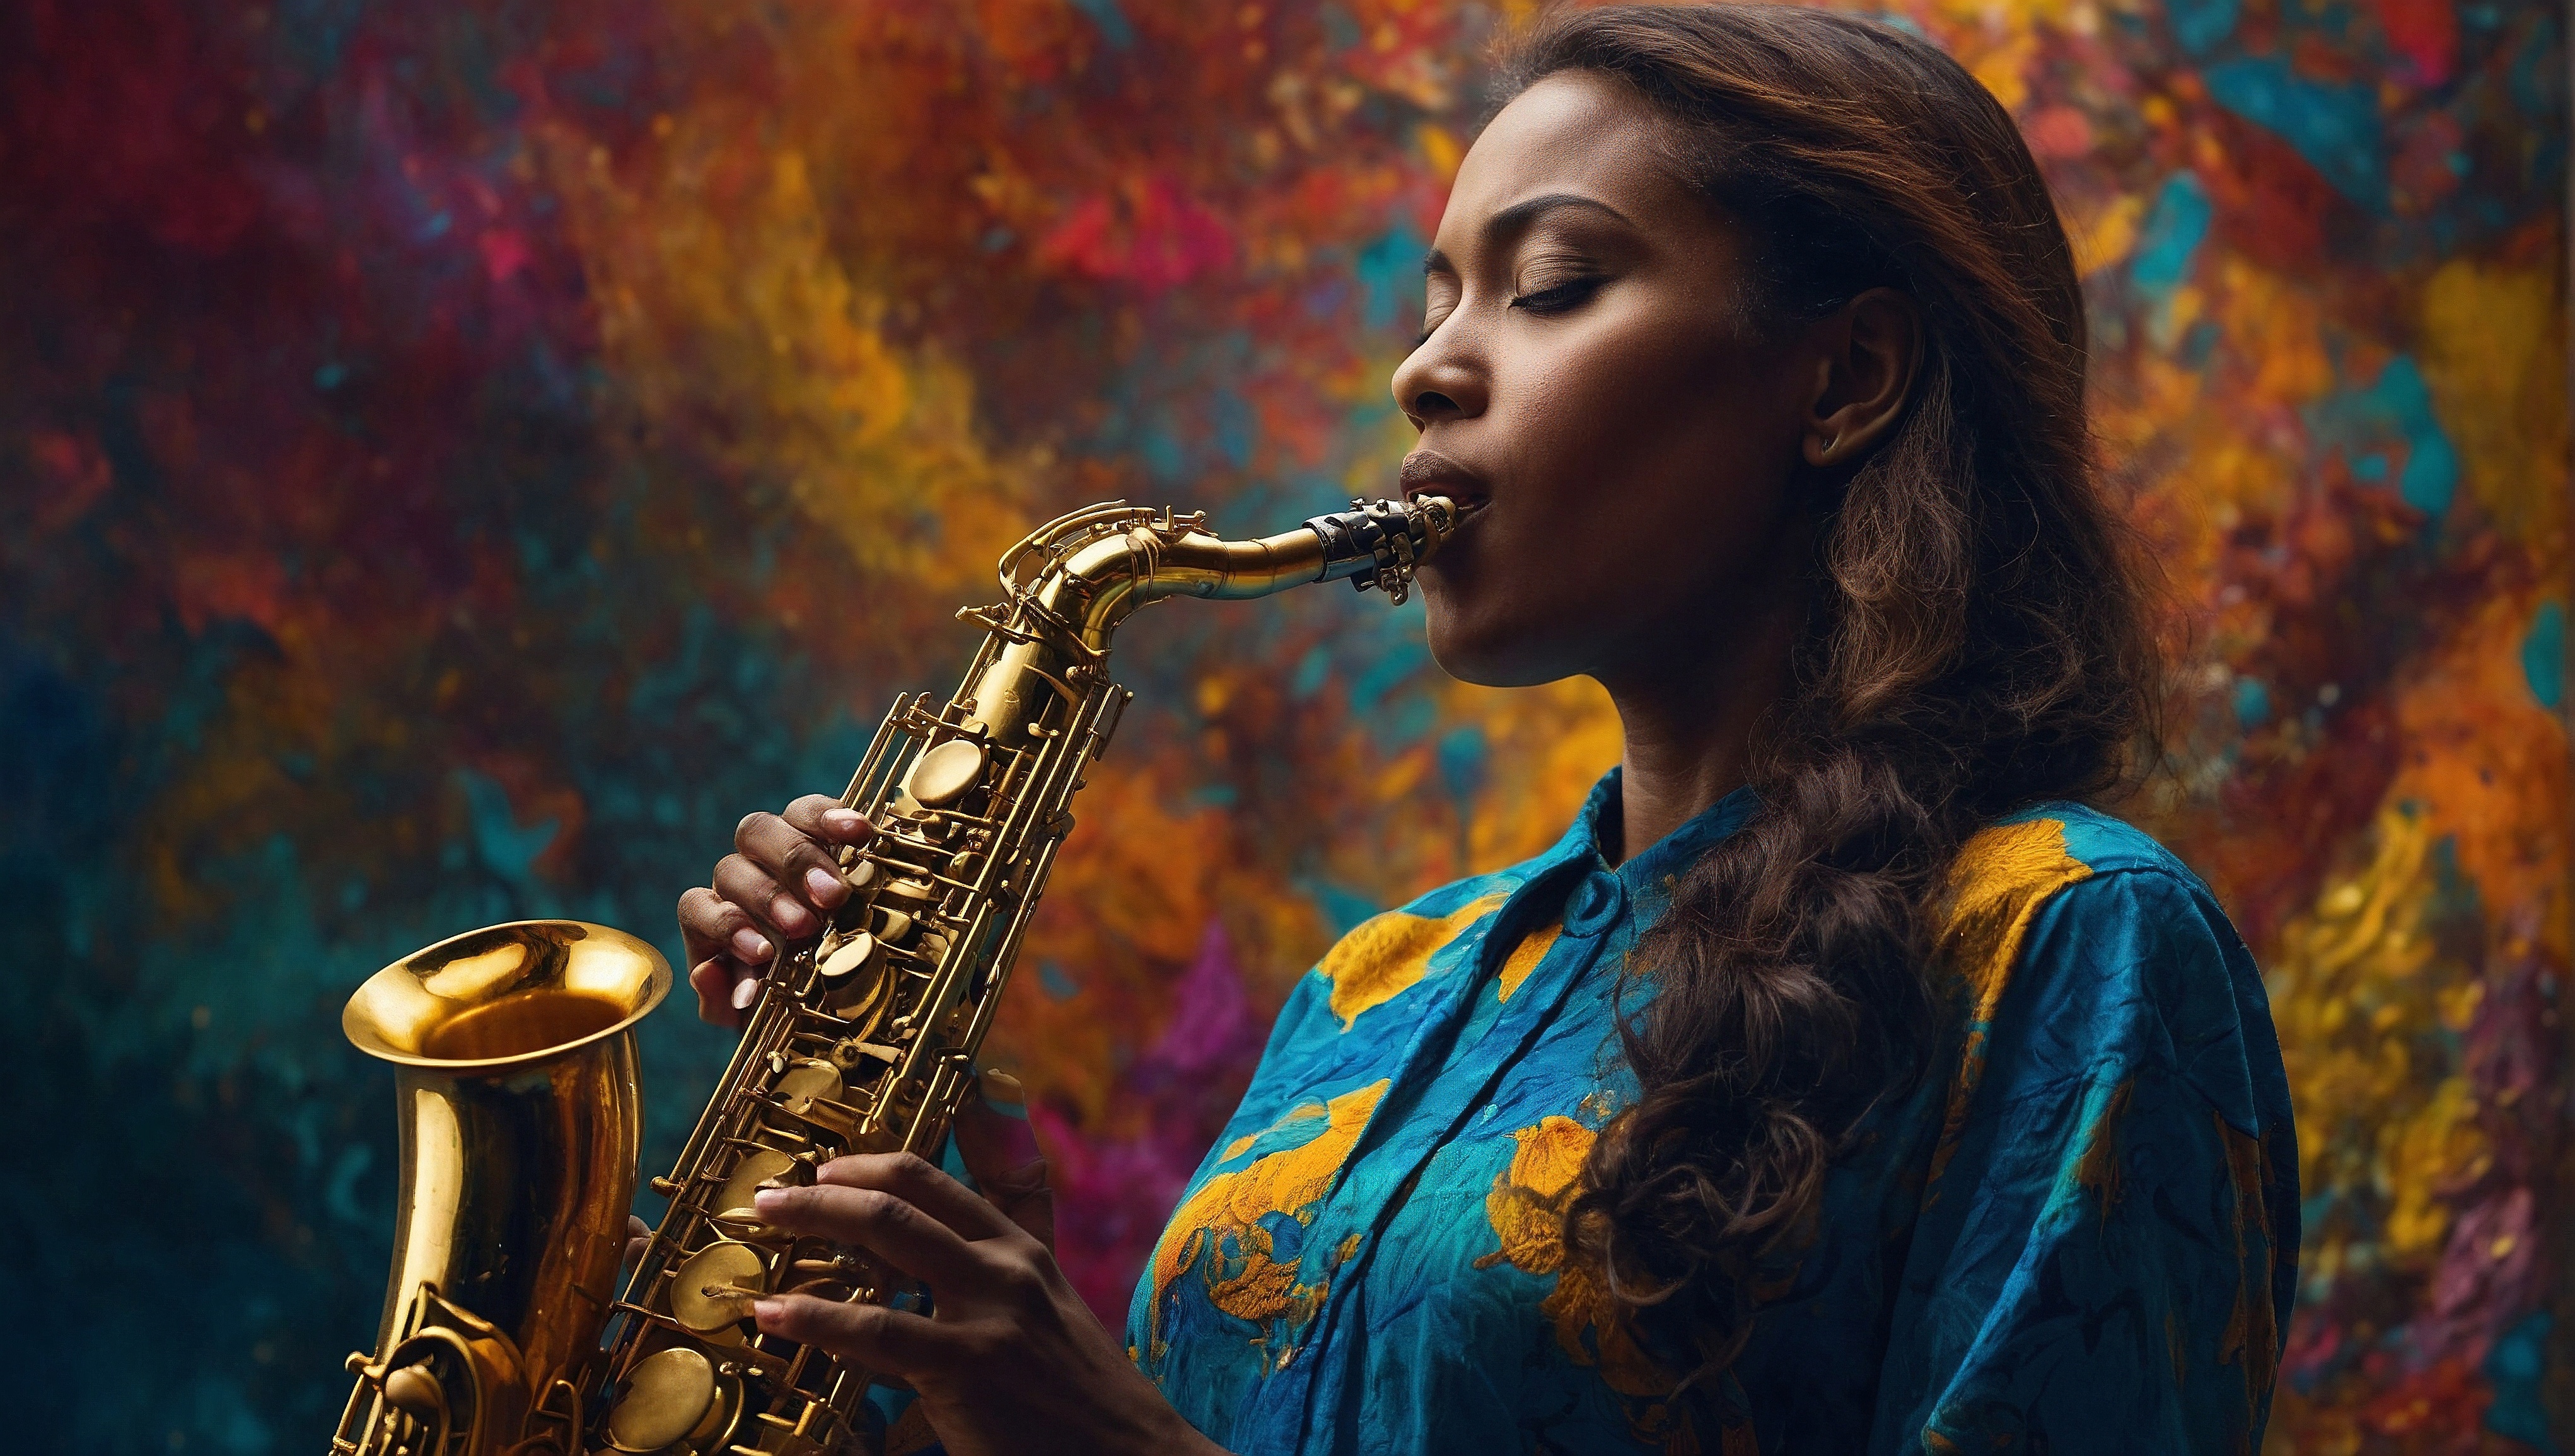 Free photo A woman wearing blue and yellow playing a saxophone